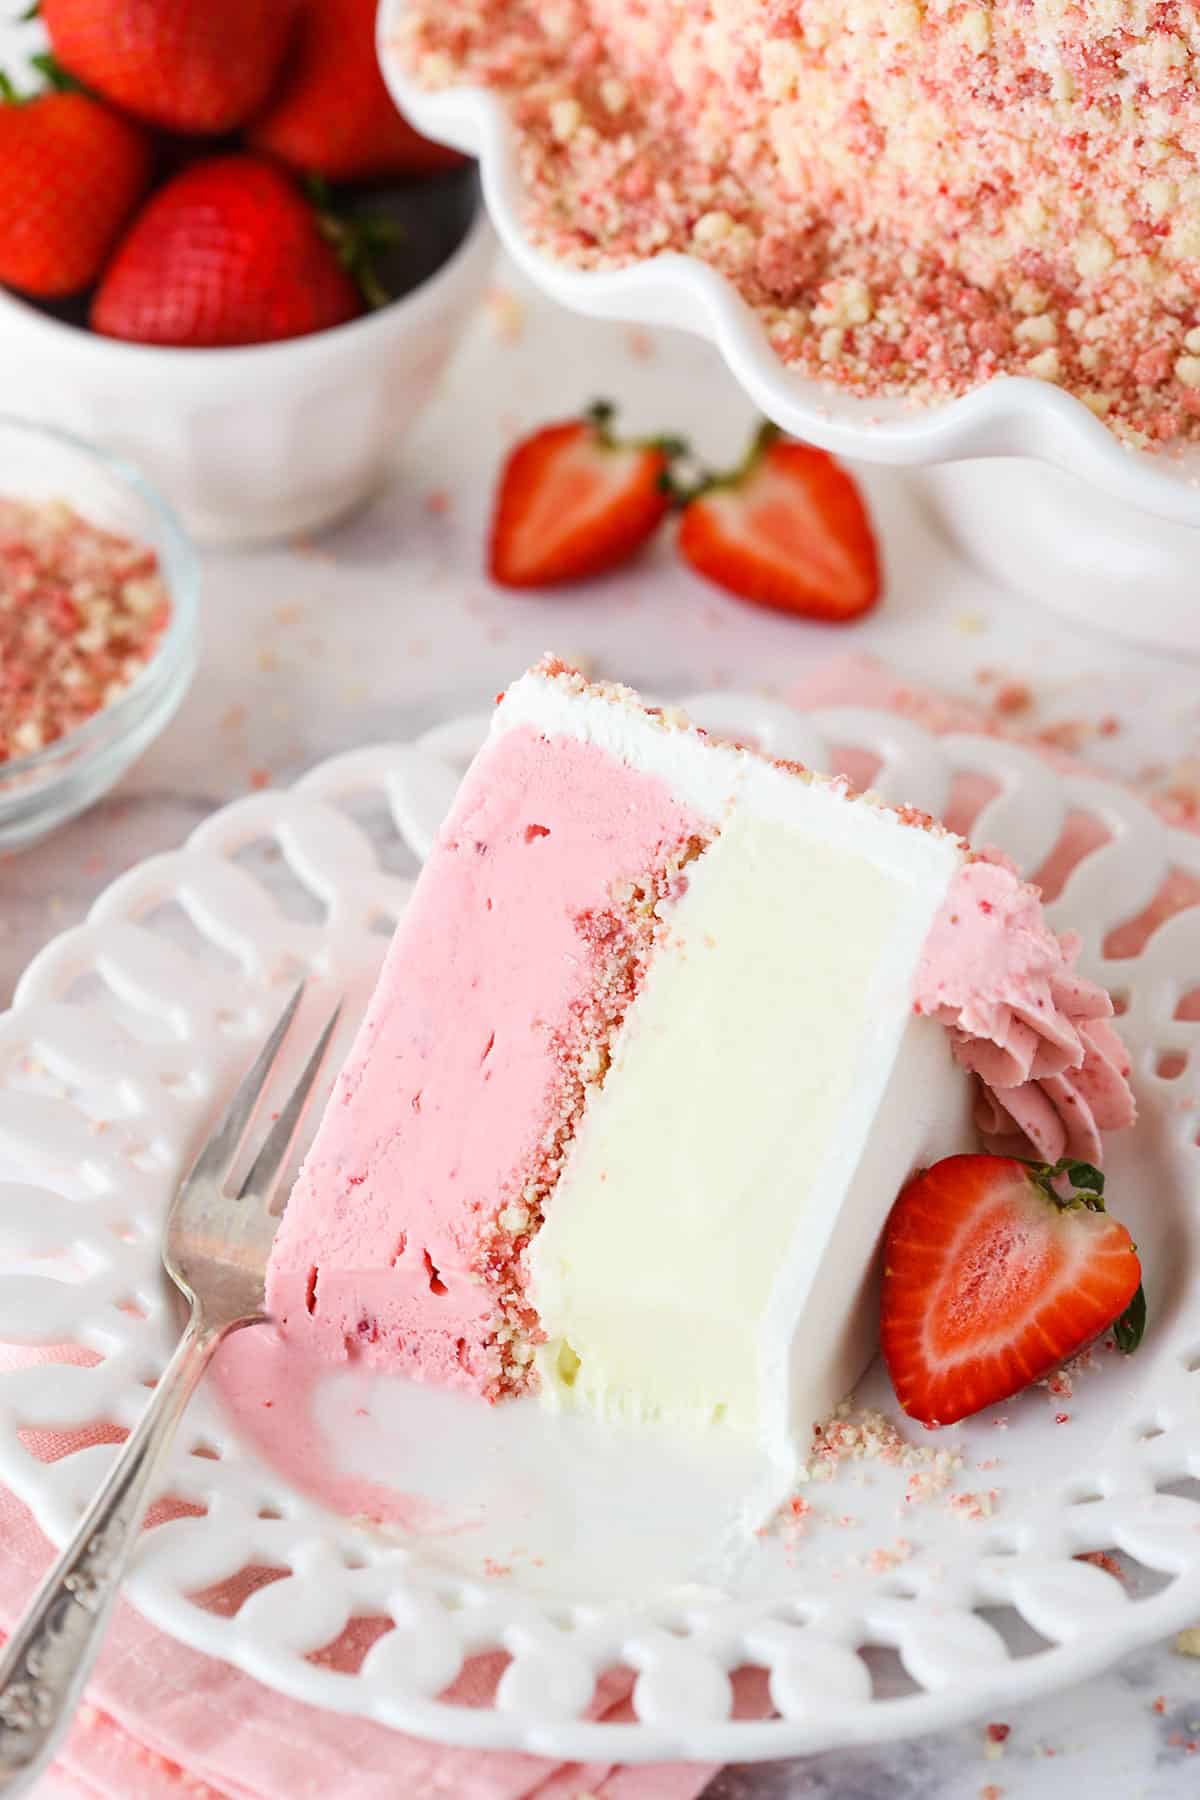 A slice of Strawberry Crunchie Ice Cream Cake with a bite taken out on a white plate with a fork